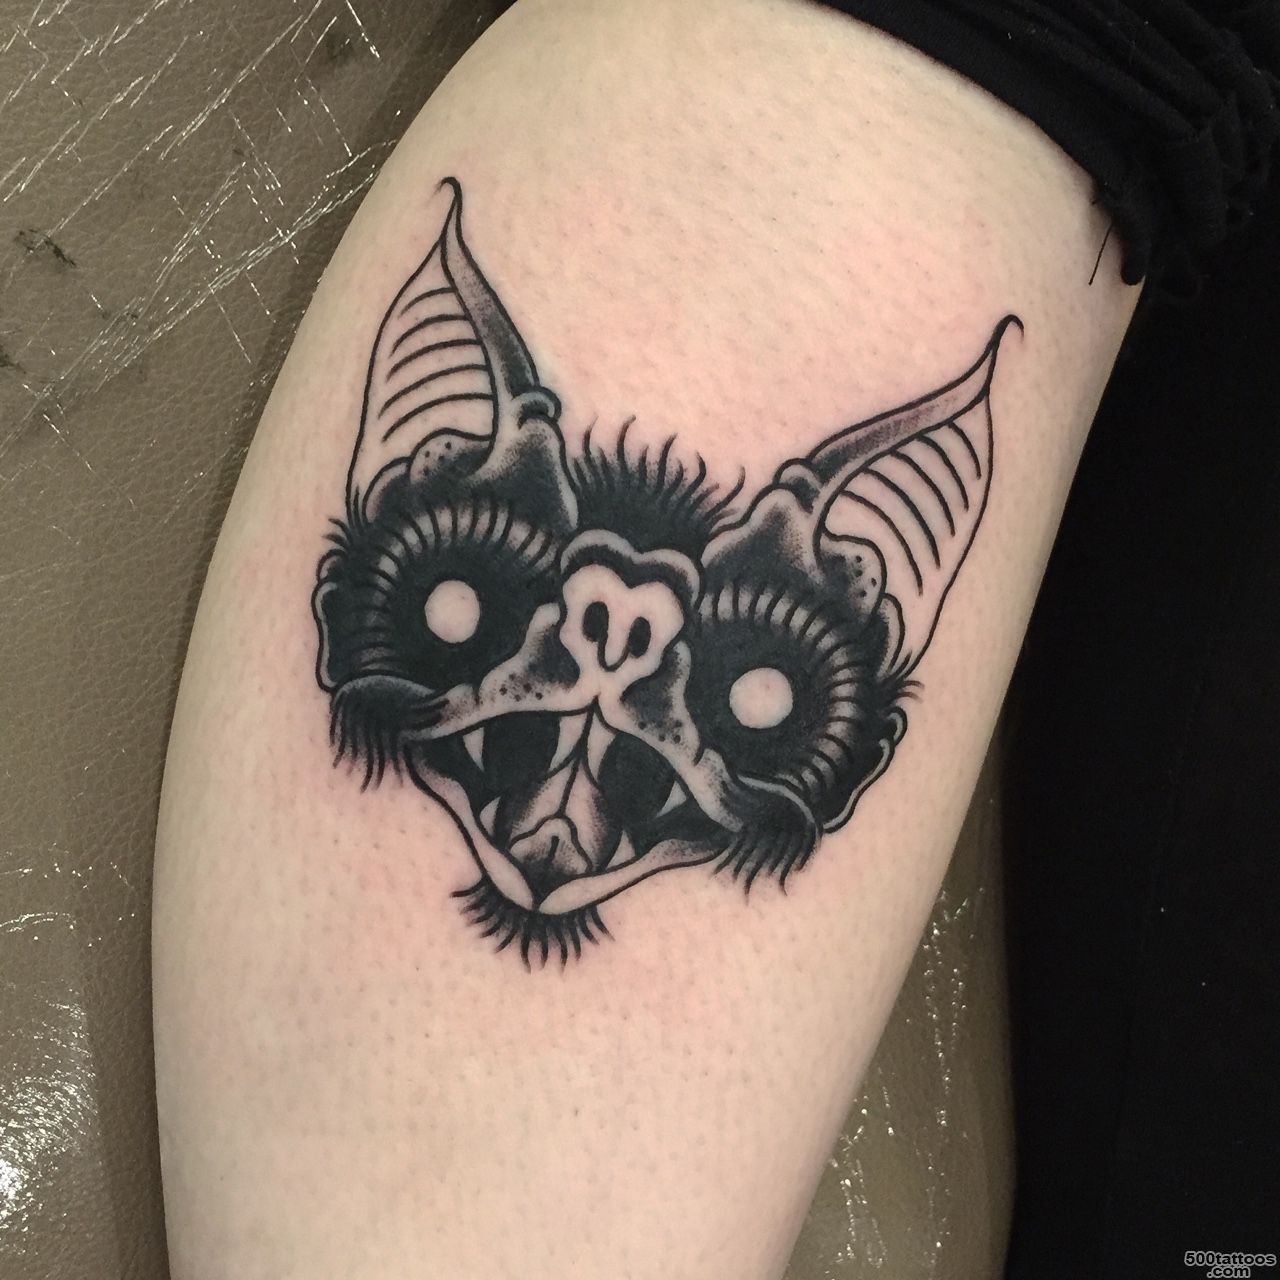 Top American Traditional Bat Tattoo Images for Pinterest Tattoos_50